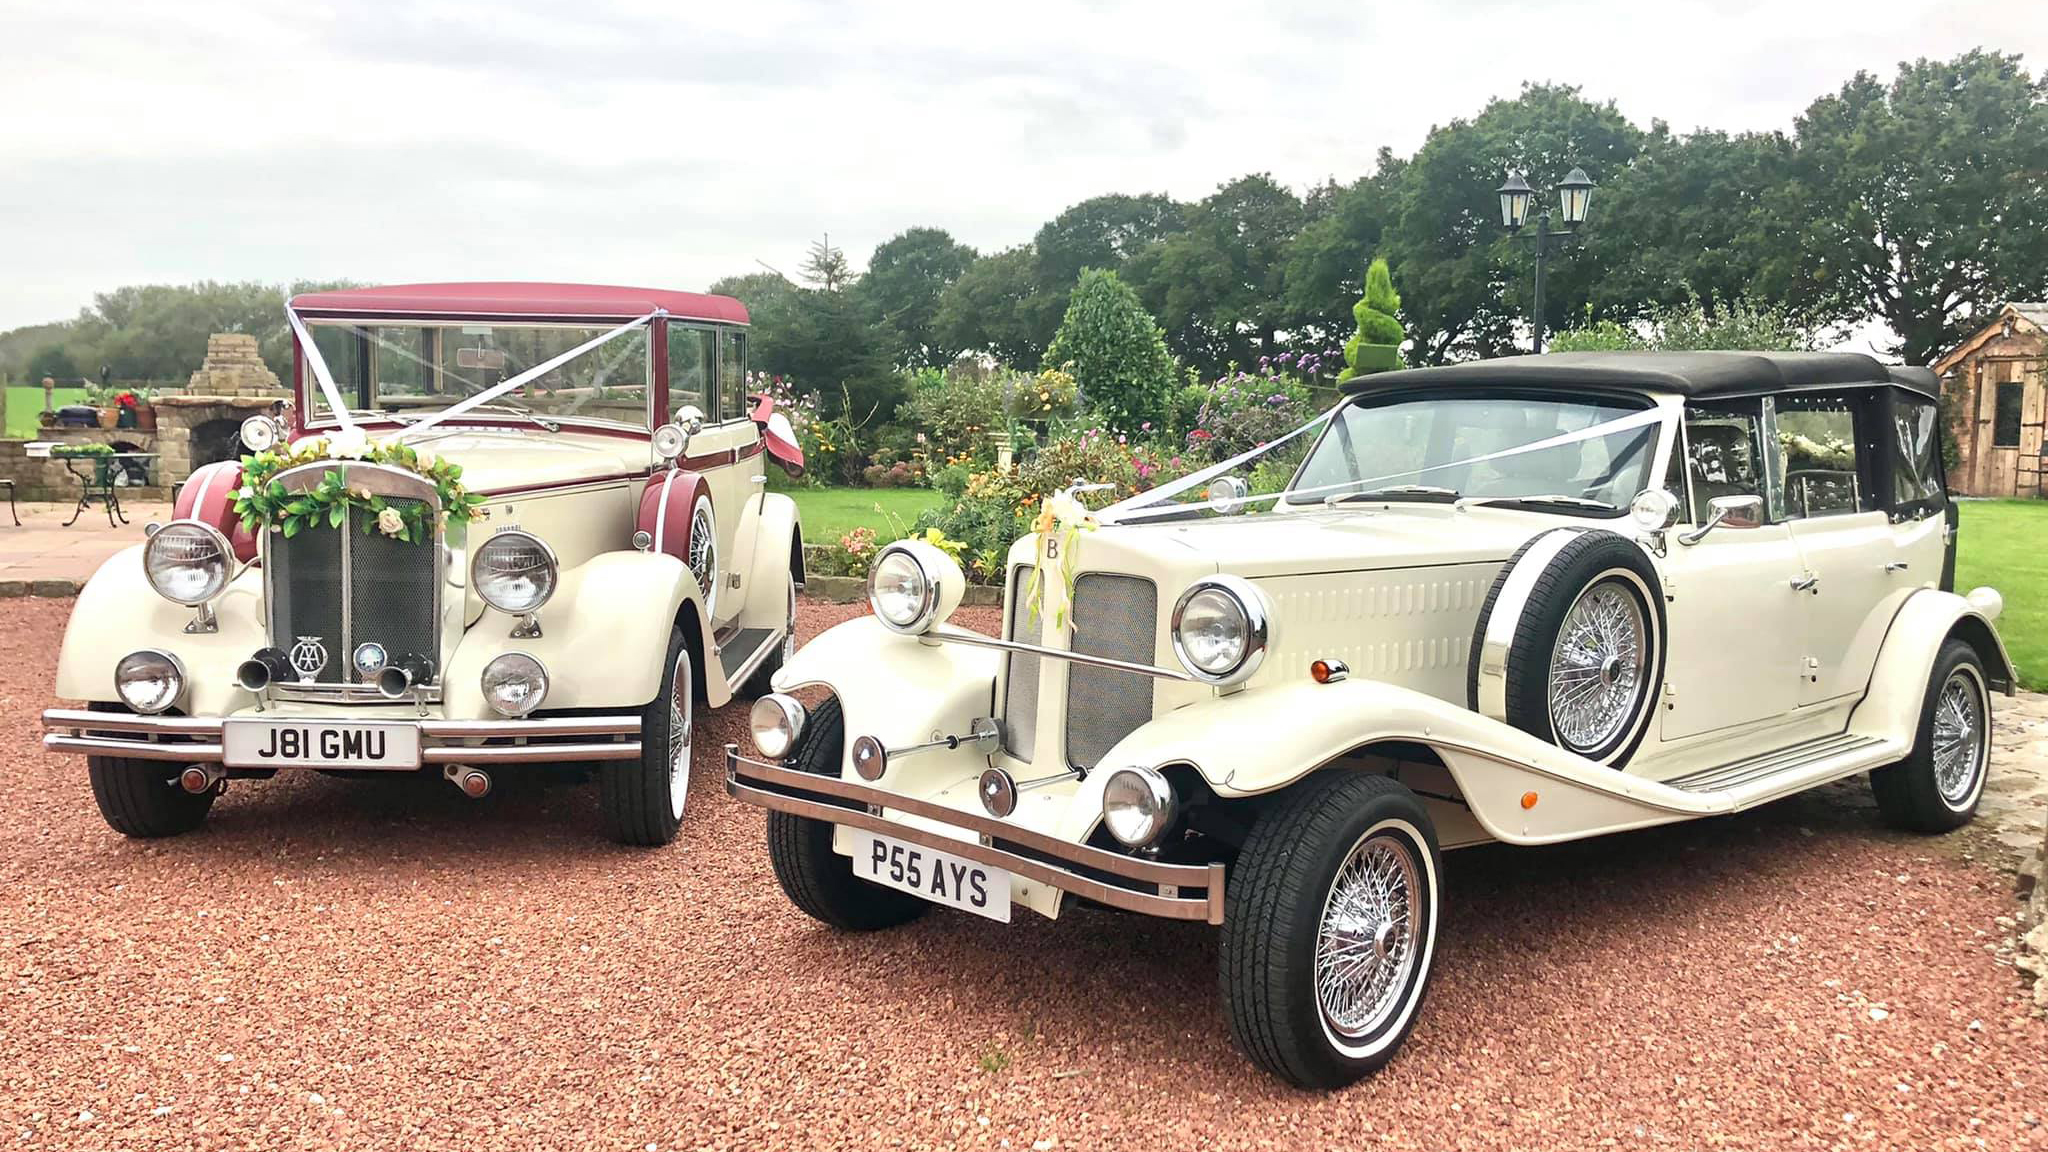 Two vintage wedding cars decorated with white ribbons and bows at a local Bolton wedding. Both vehicles are parked side-by-side